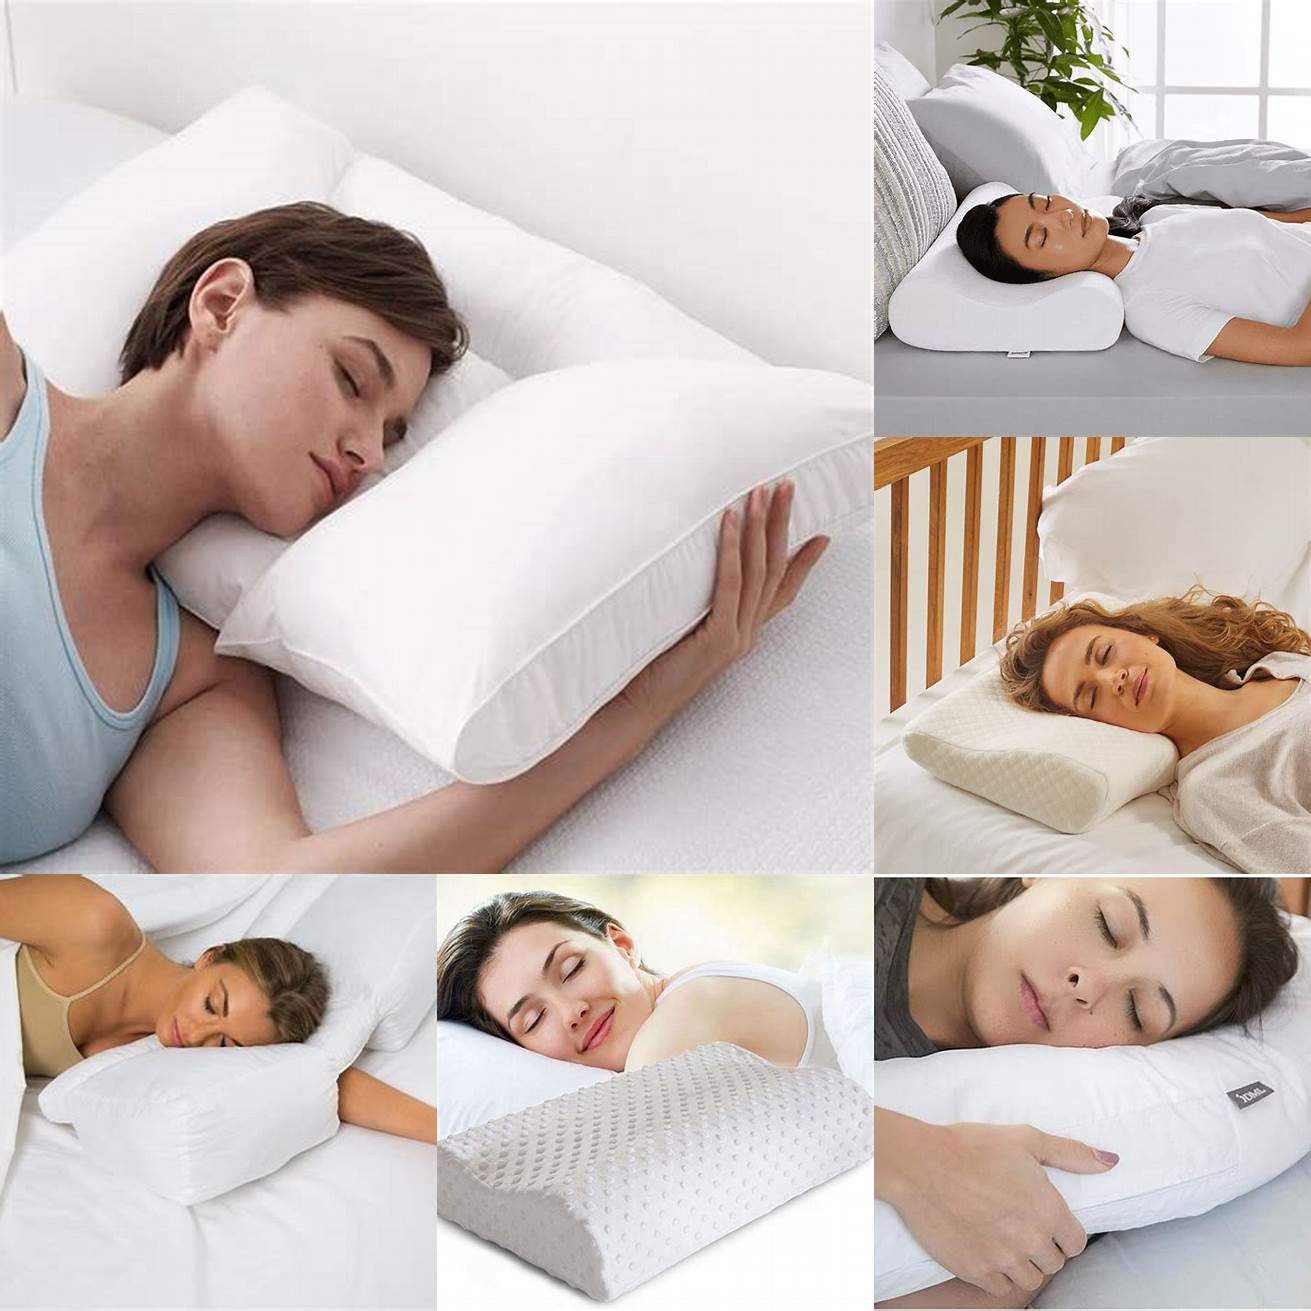 Pillows A good quality pillow can provide support for your neck and head ensuring a good nights sleep Duvet A duvet can keep you warm and cozy during cold nights Mattress Topper A mattress topper can add extra comfort and support to your mattress Bedsheet A good quality bedsheet can keep your bed clean and fresh Blanket A blanket can provide extra warmth and comfort during chilly nights Bedside Table A bedside table can provide storage for your books phone or other essentials